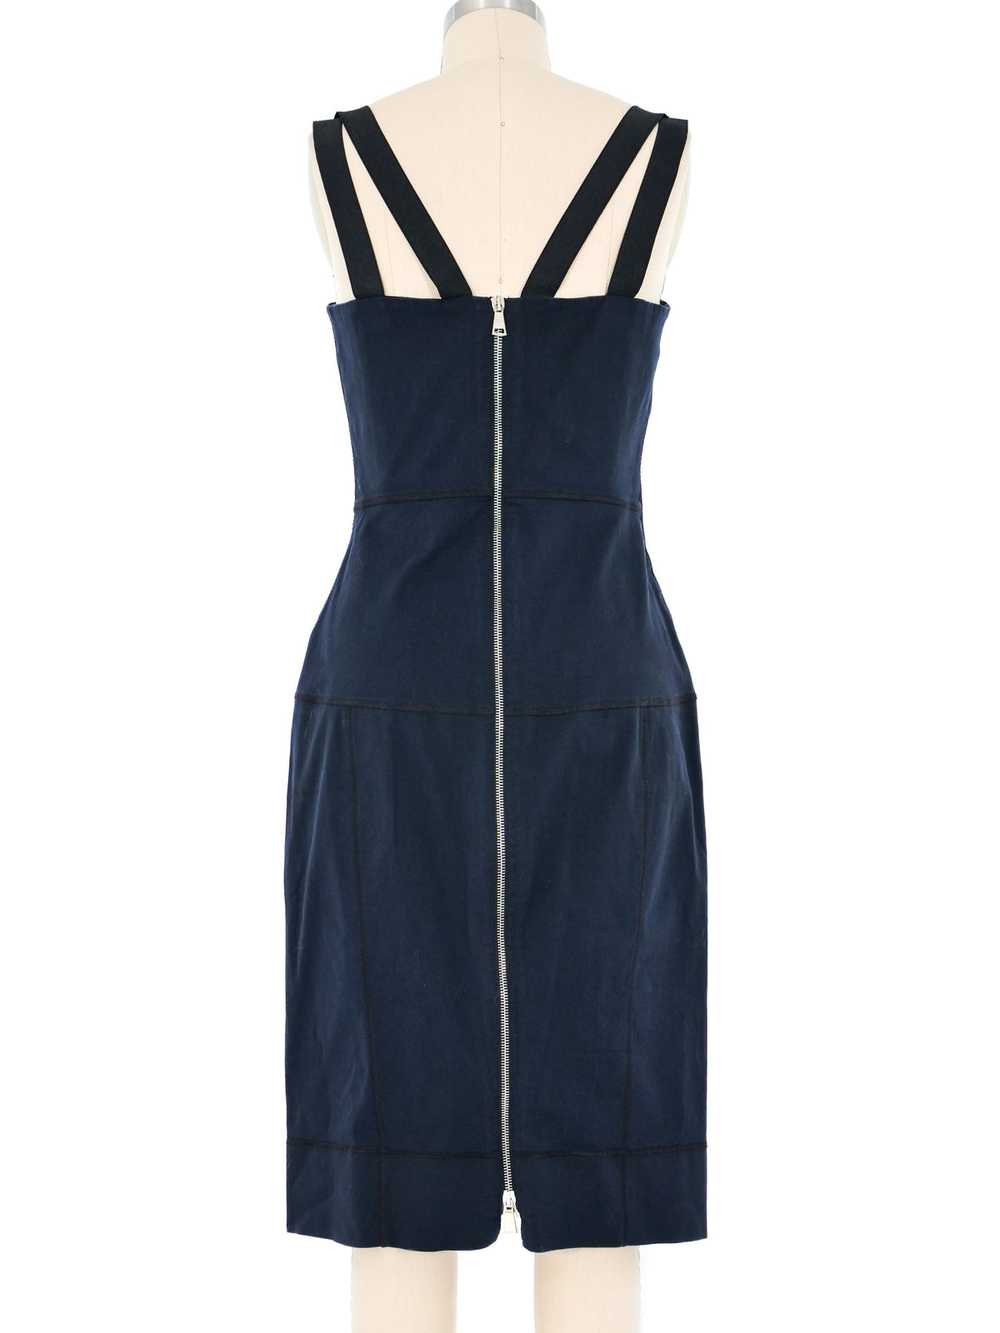 1990s Dolce And Gabbana Navy Bustier Dress - image 4